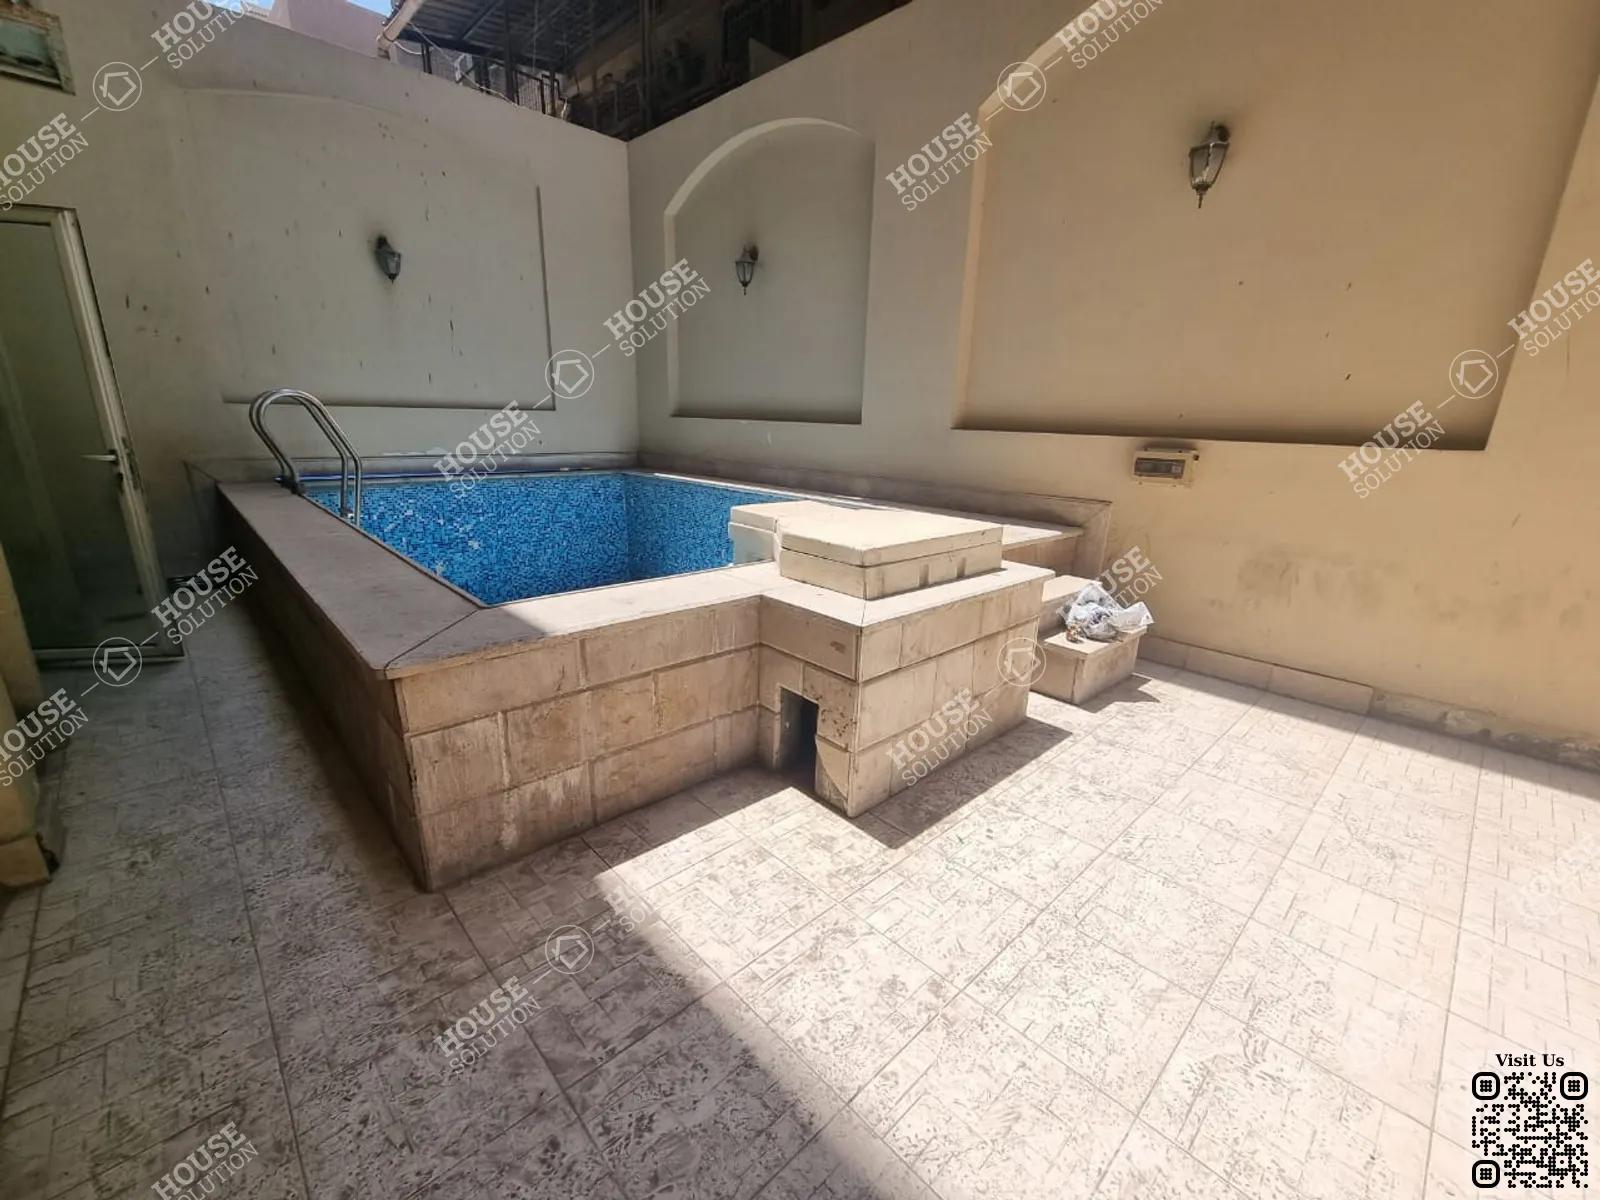 PRIVATE SWIMMING POOL  @ Office spaces For Rent In Maadi Maadi Sarayat Area: 409 m² consists of 6 Bedrooms 4 Bathrooms Semi furnished 5 stars #5698-0